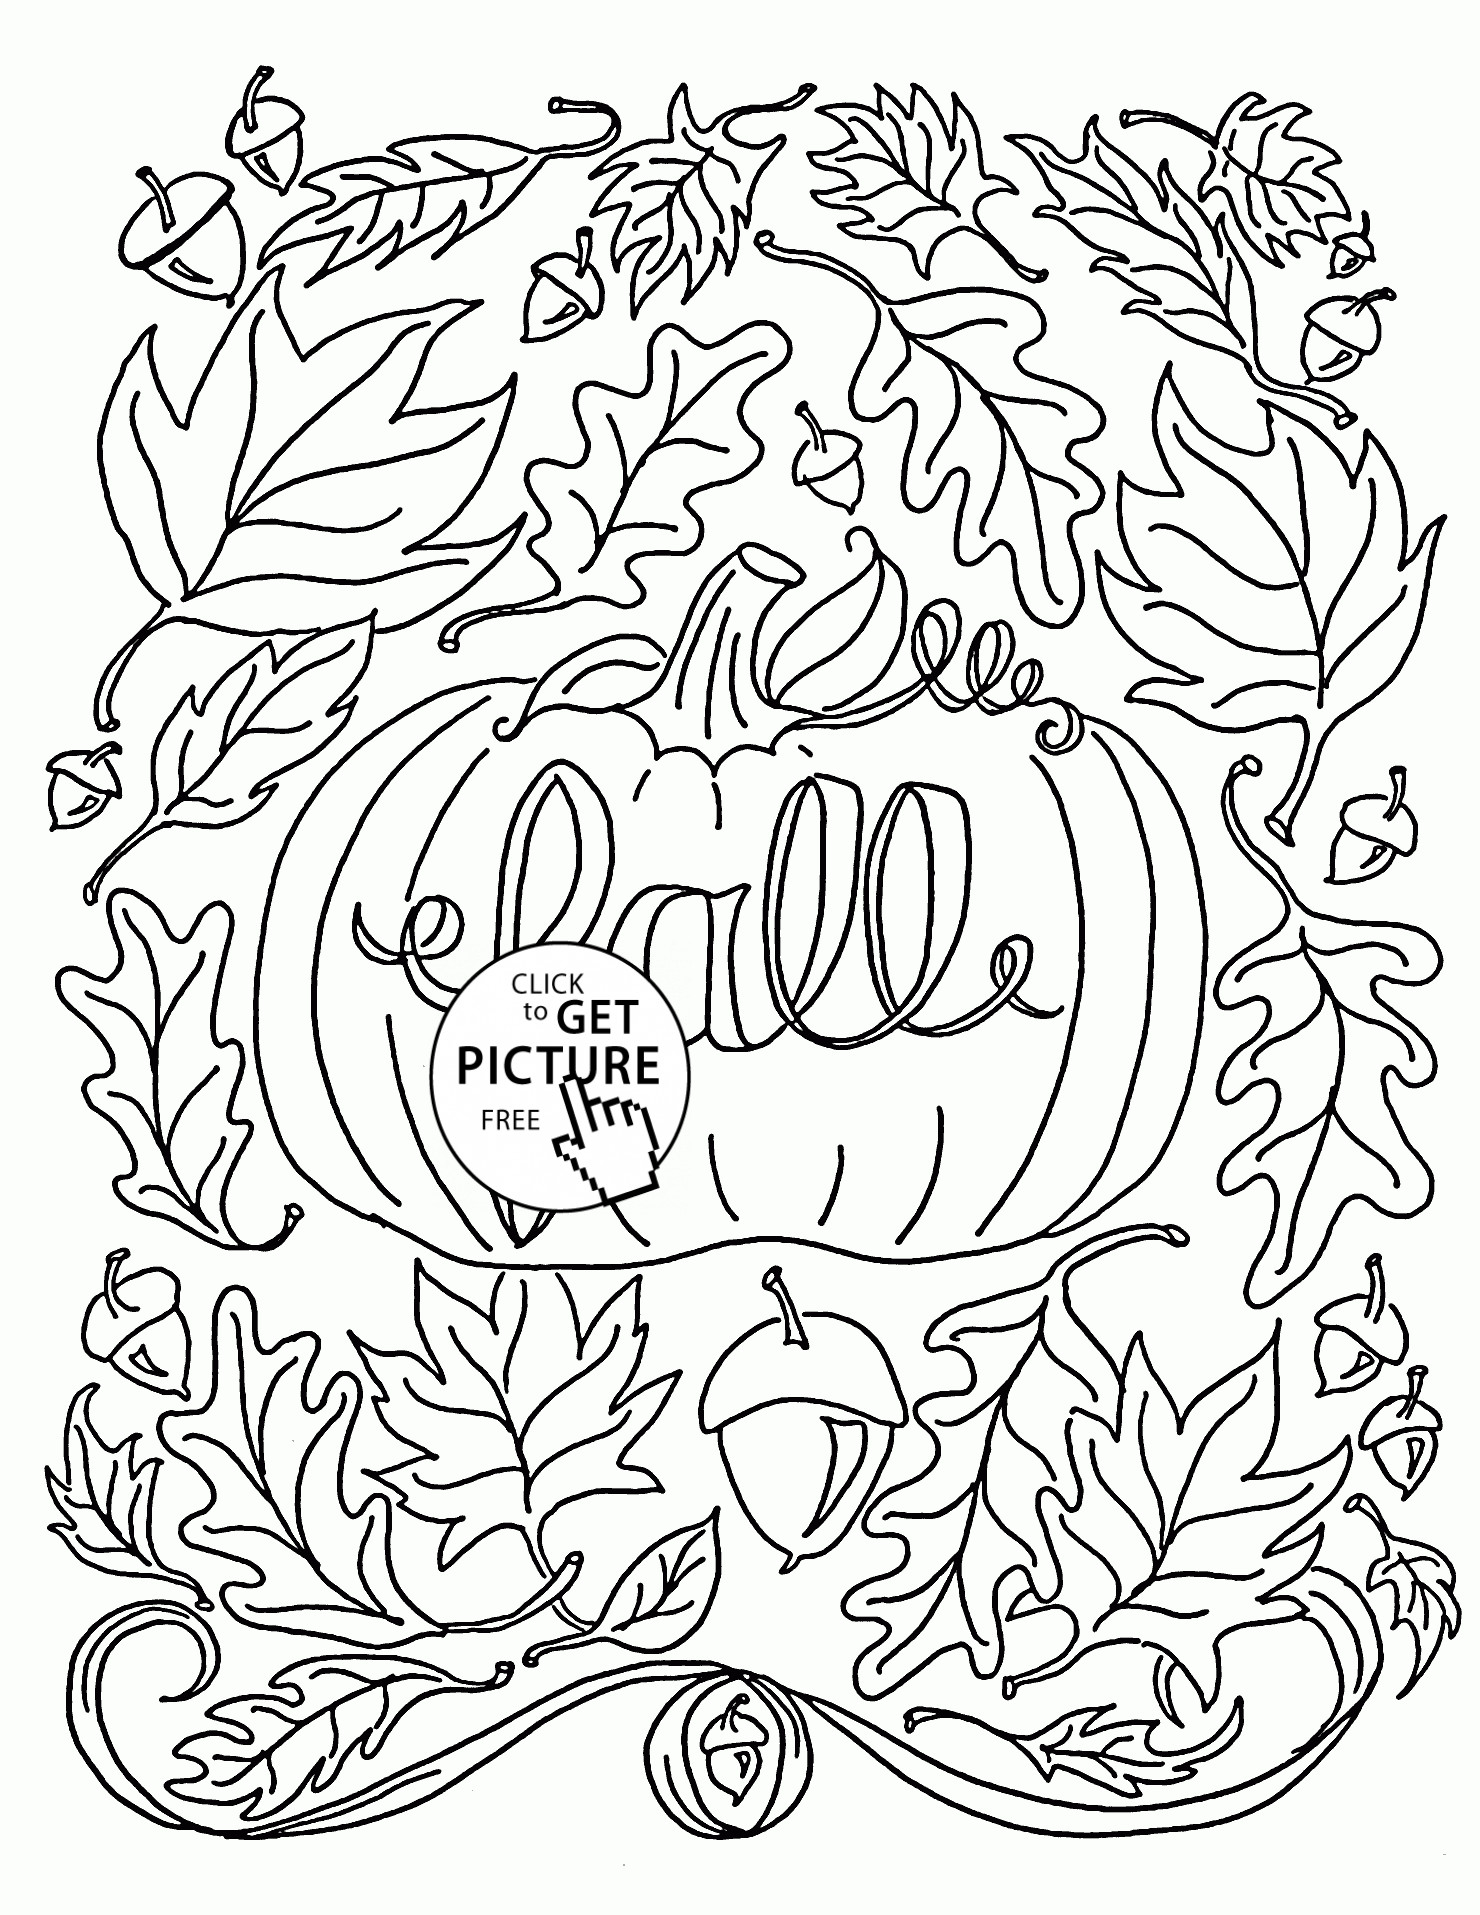 Stress Free Autumn Coloring Sheets For Kids
 It is Fall coloring pages for kids autumn printables free